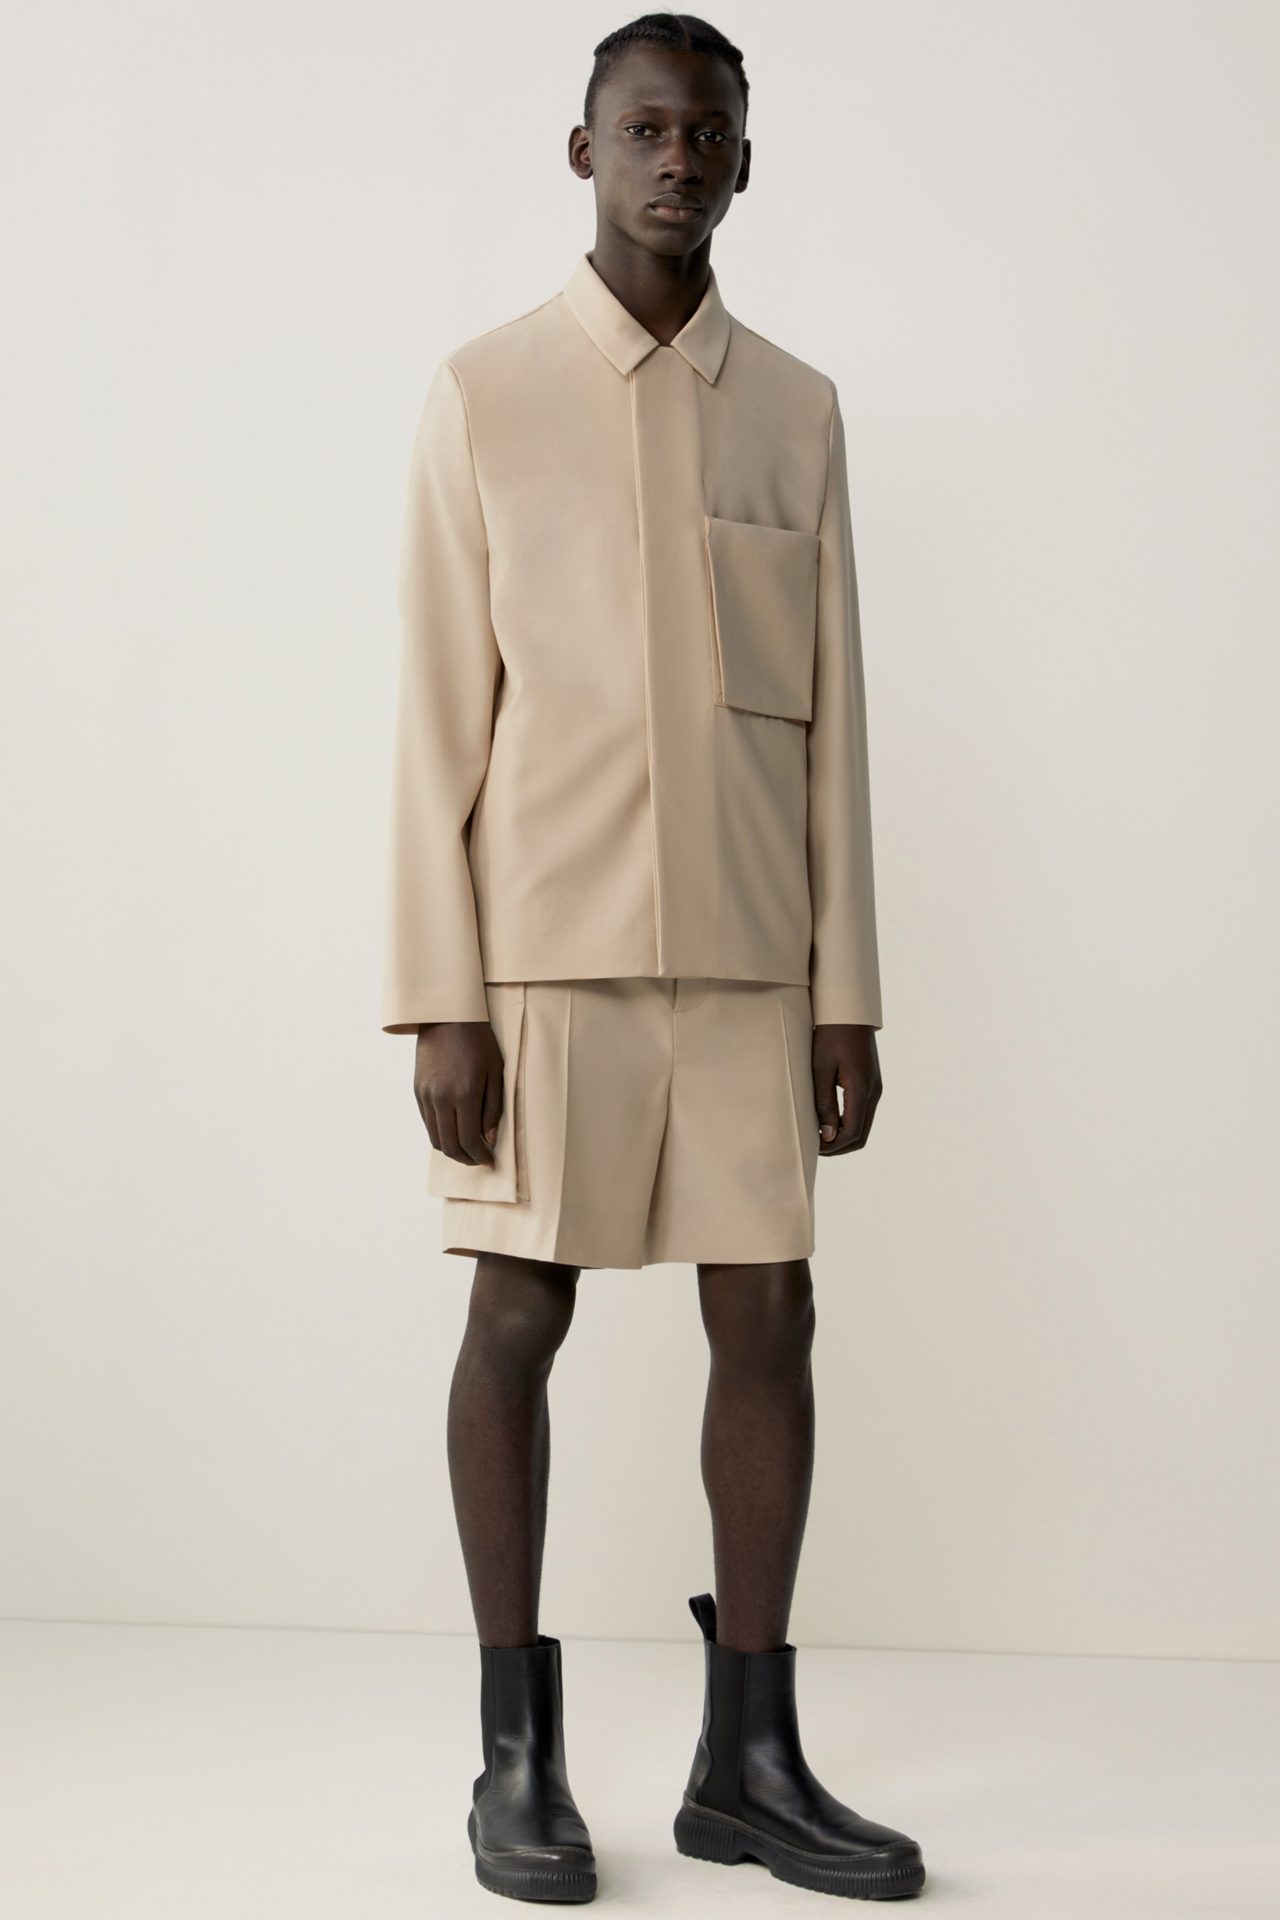 COS Explores Responsibly-Sourced Fabrics for Its Fall Ready-to-Wear 2020  Collection